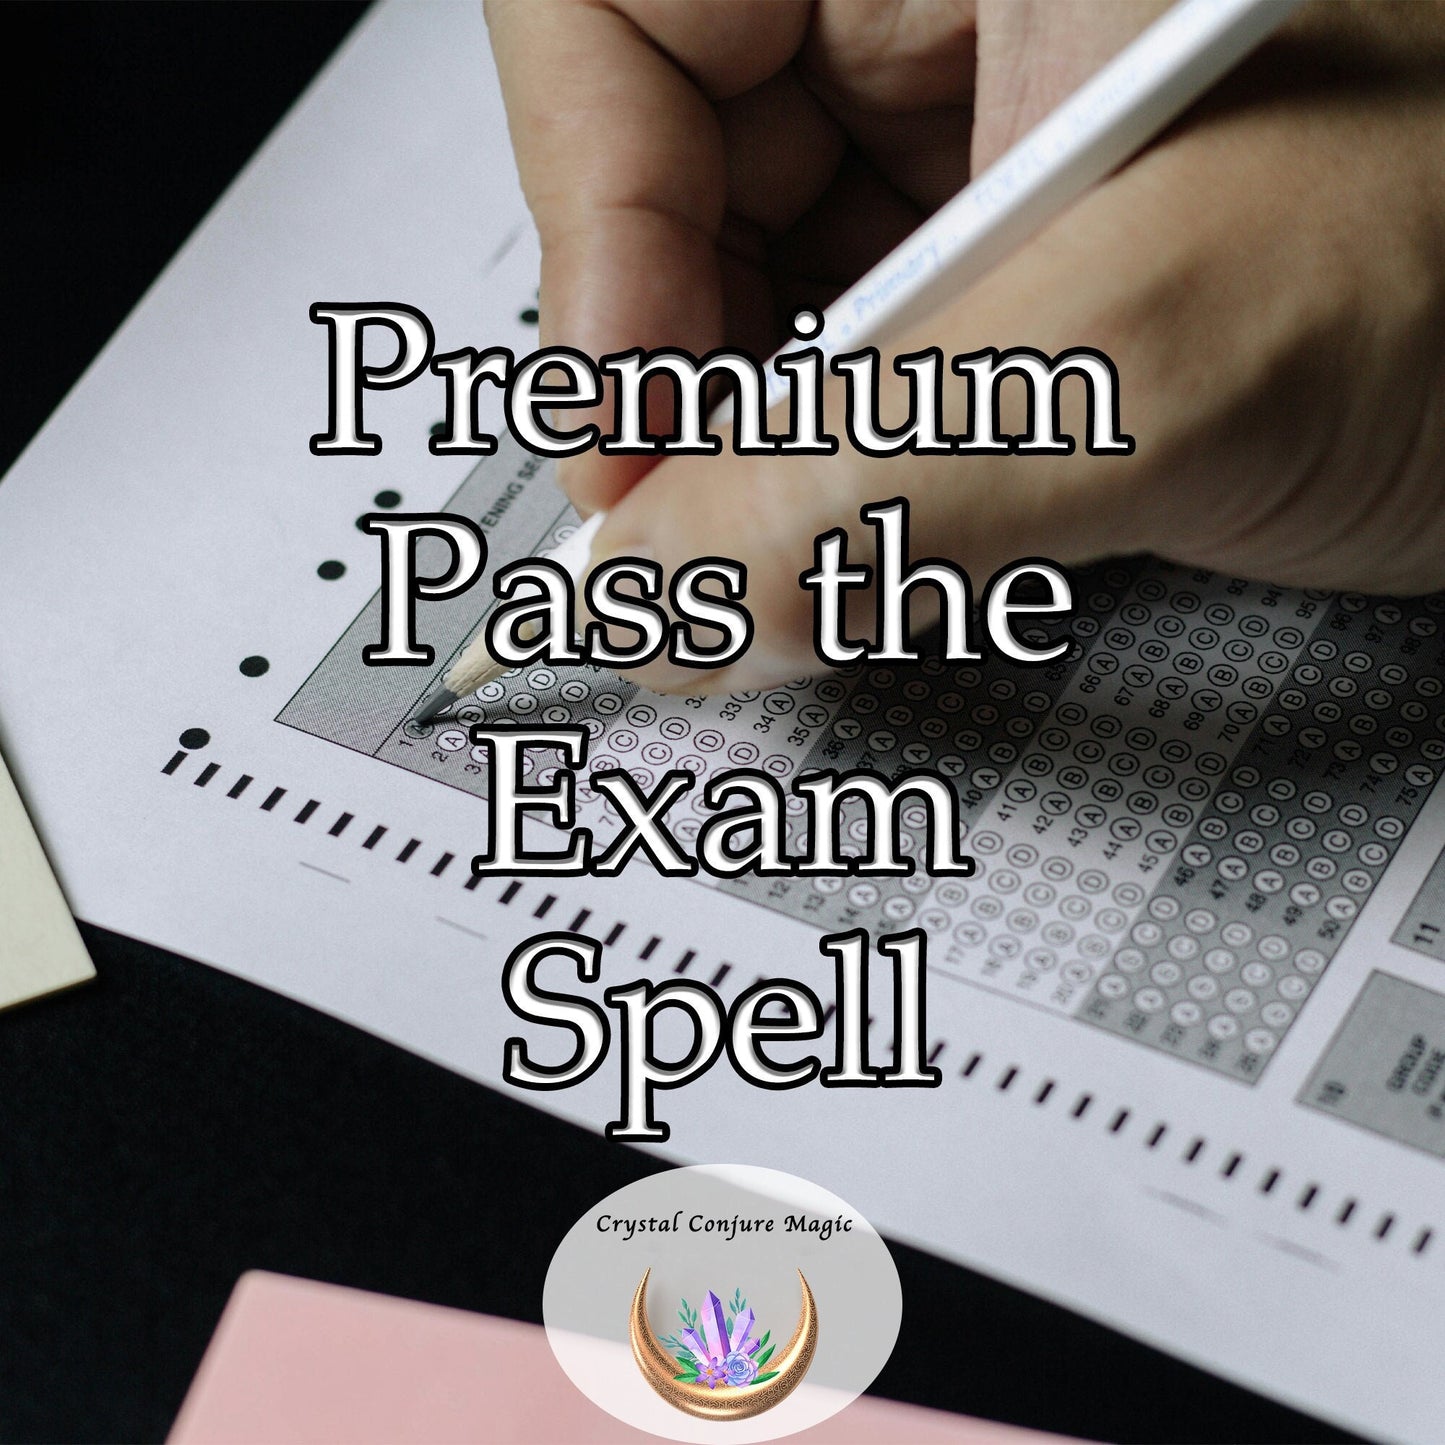 Premium Pass the Exam Spell - instill unshakeable confidence and reignite your passion for learning